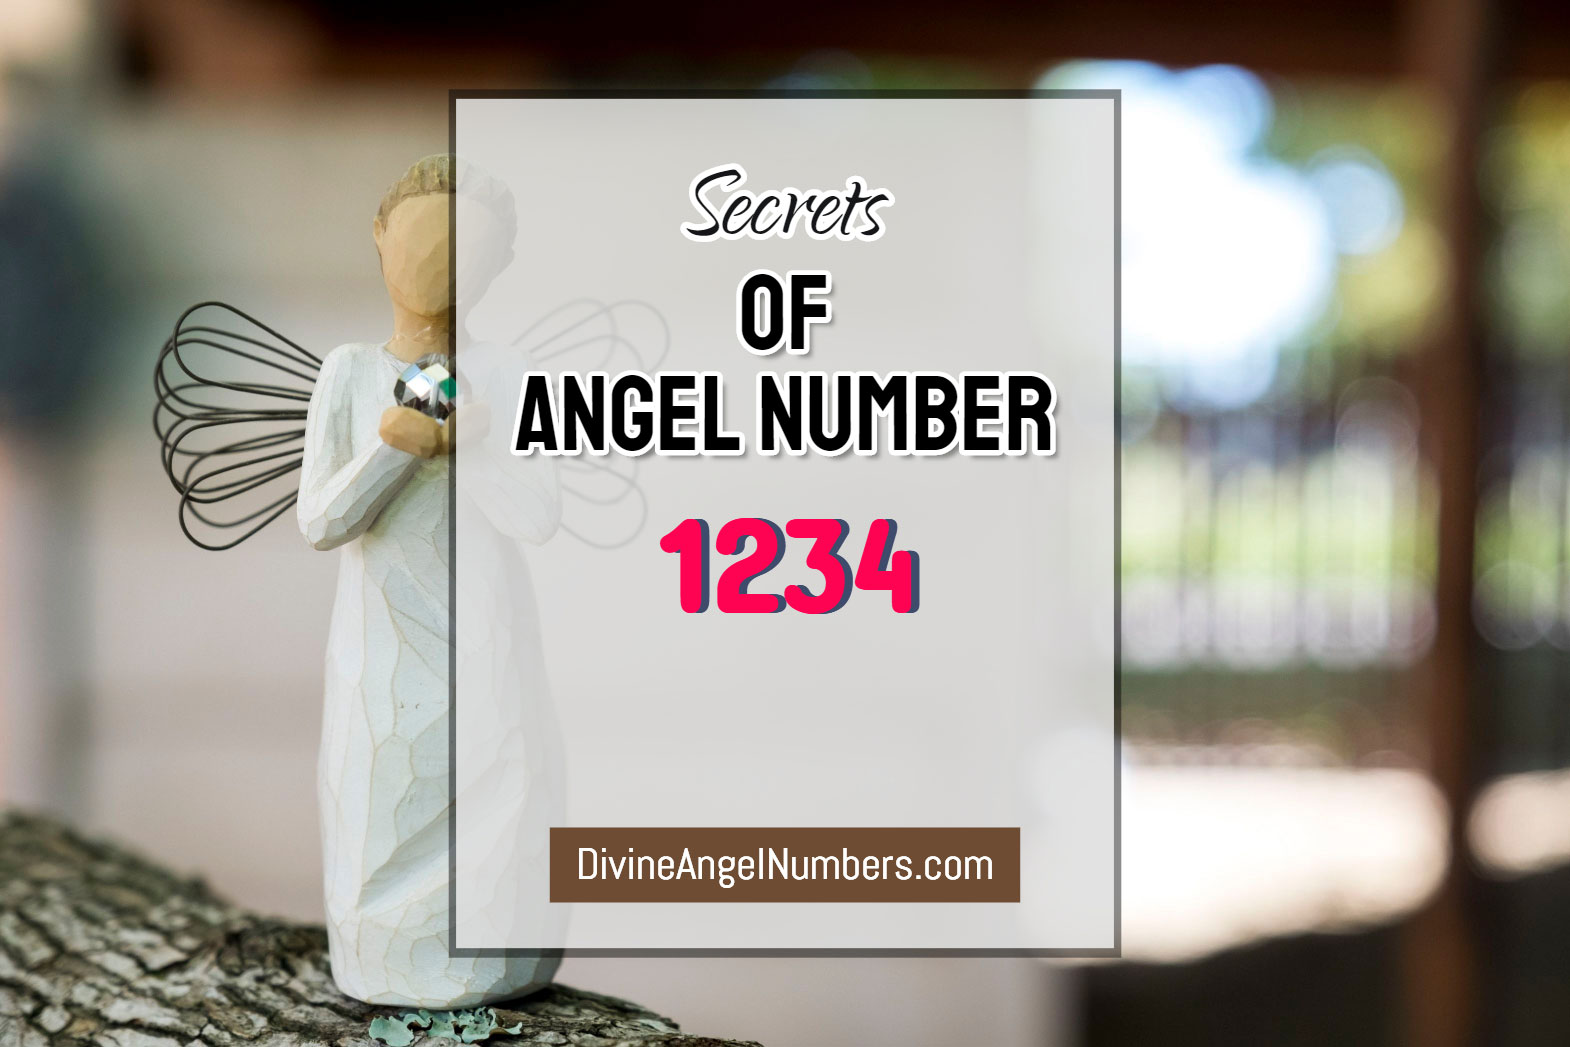 6 Reasons Why You Are Seeing Angel Number 1234 - Meaning Of 1234